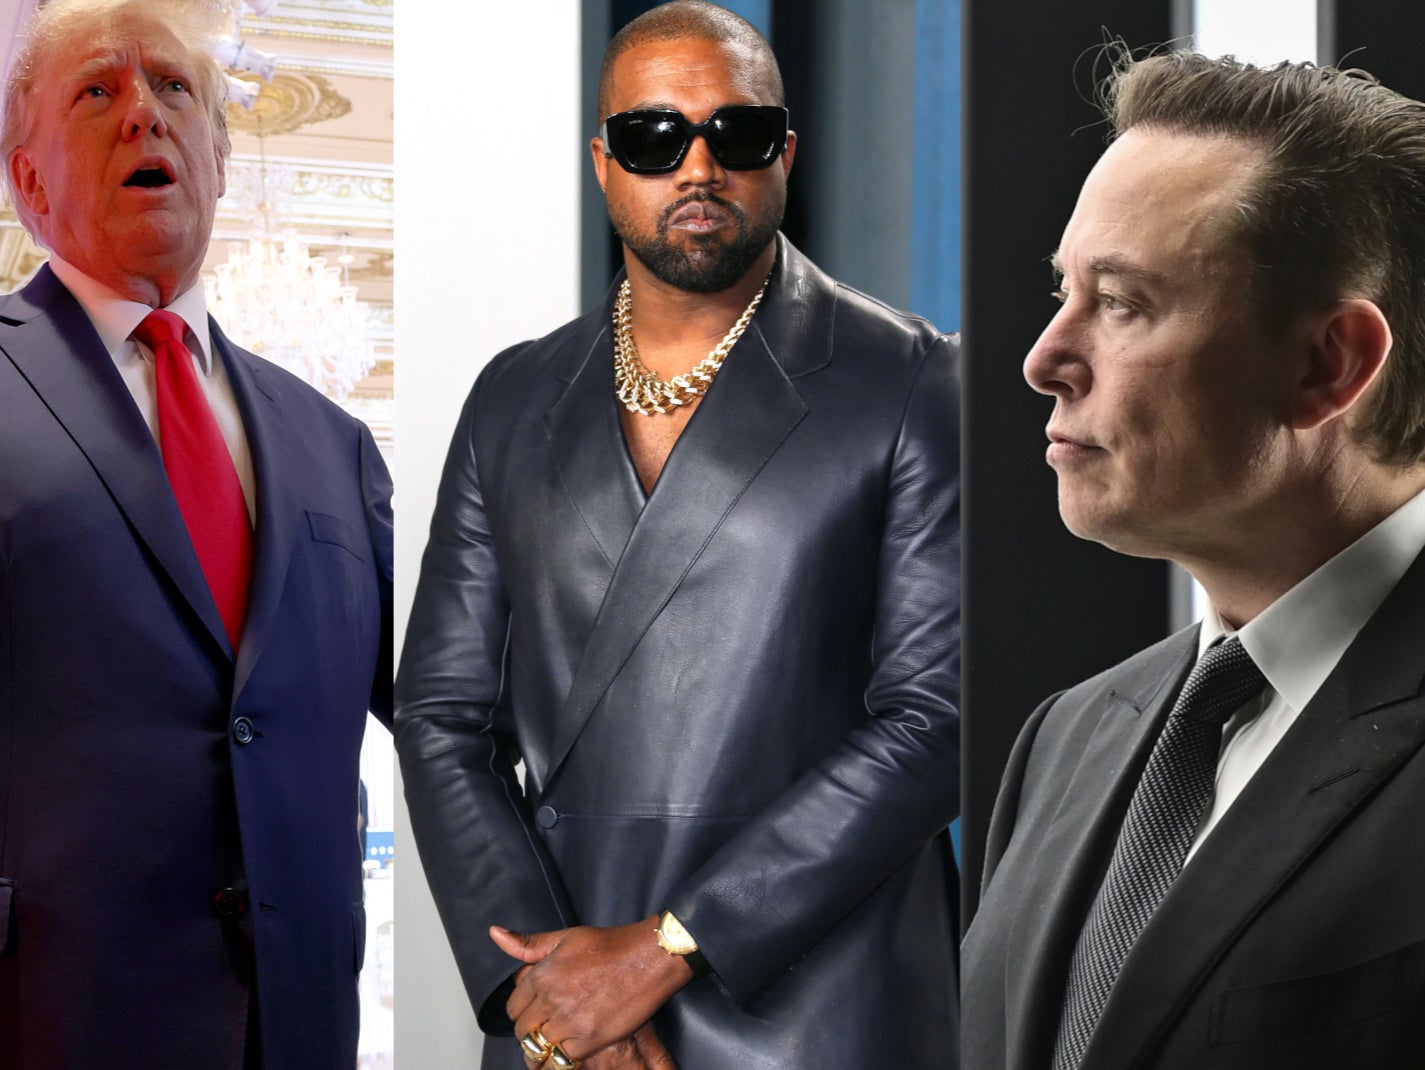 Former President Donald Trump, rapper Kanye West, and Tesla CEO and Twitter owner Elon Musk